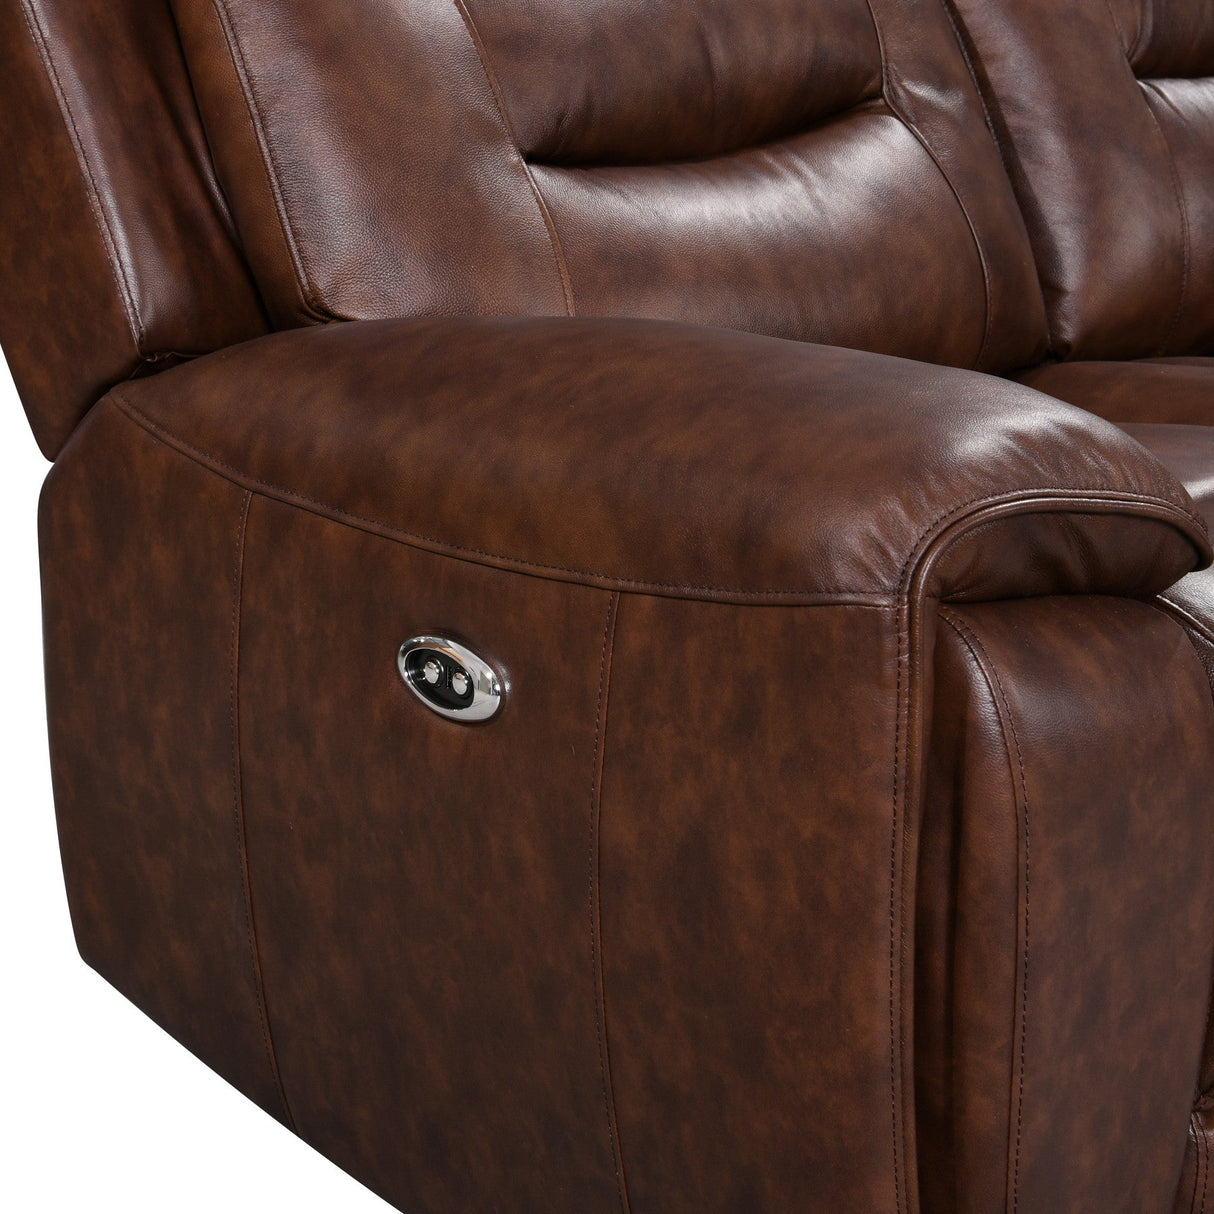 Rosewood Brown Leather Power Reclining Living Room Set - Eve Furniture